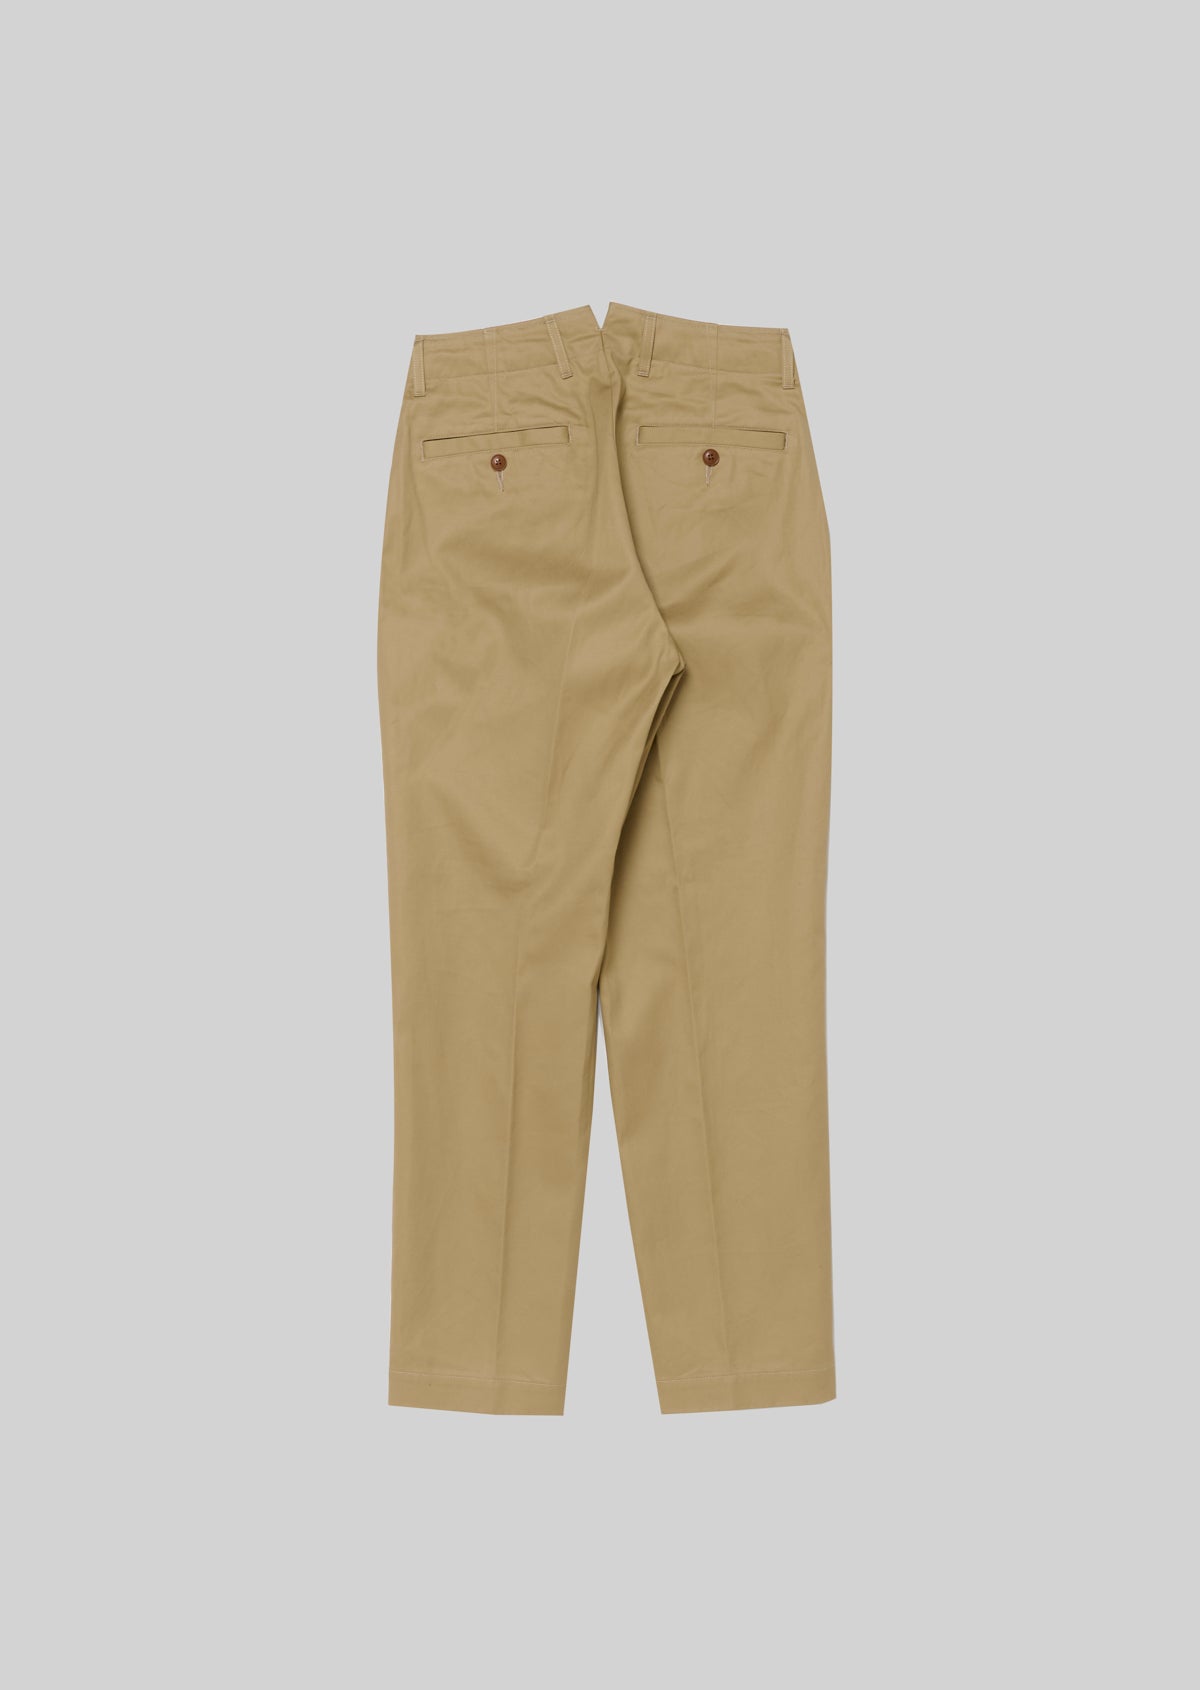 CHINO TROUSERS BEIGE 8281-1400